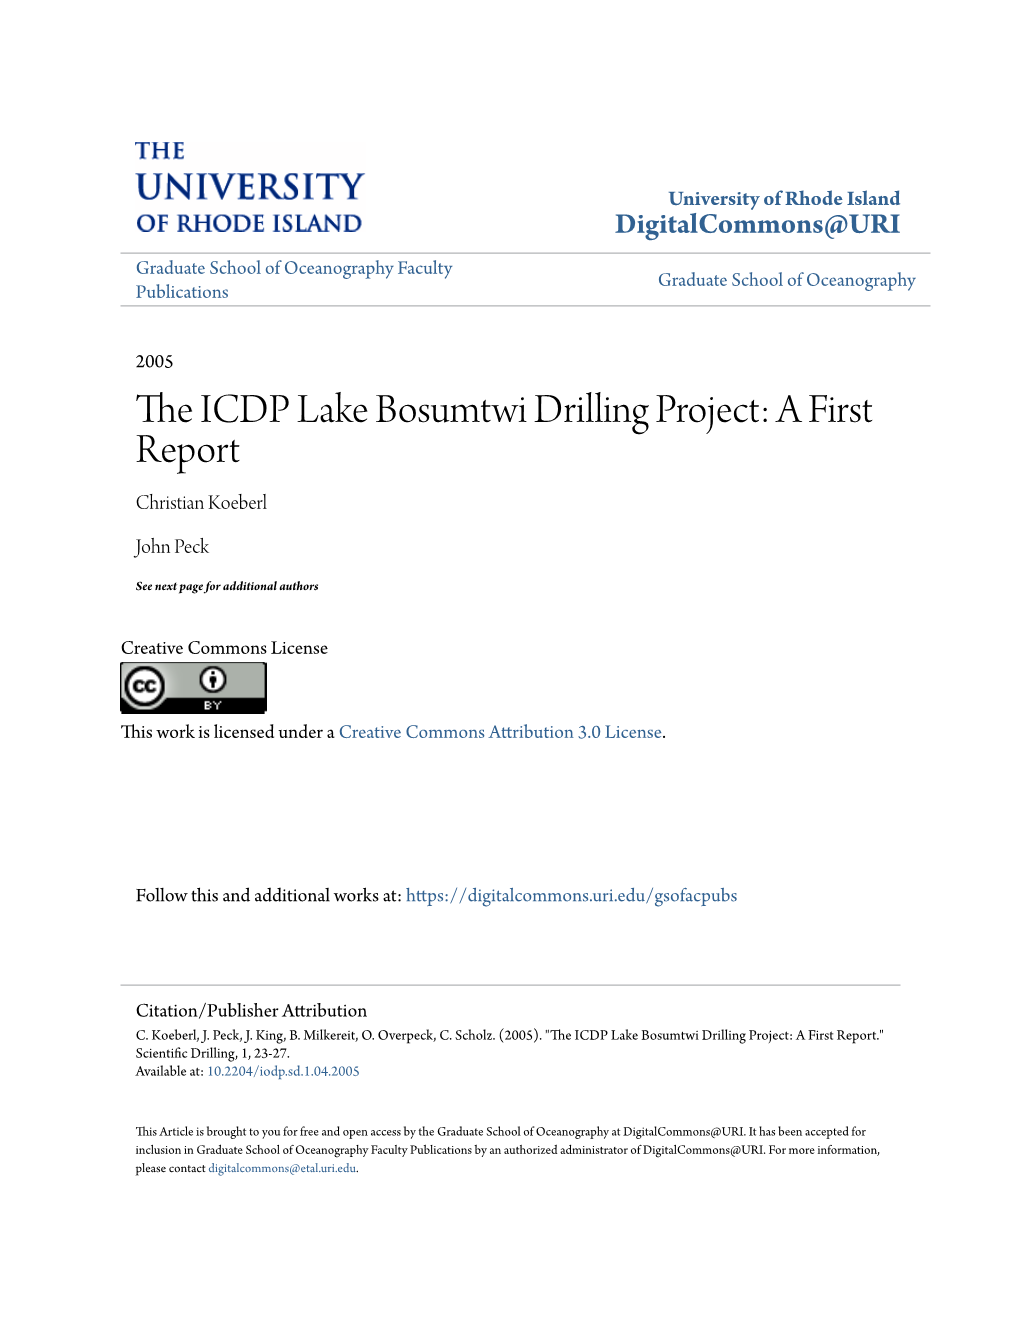 The ICDP Lake Bosumtwi Drilling Project: a First Report Christian Koeberl